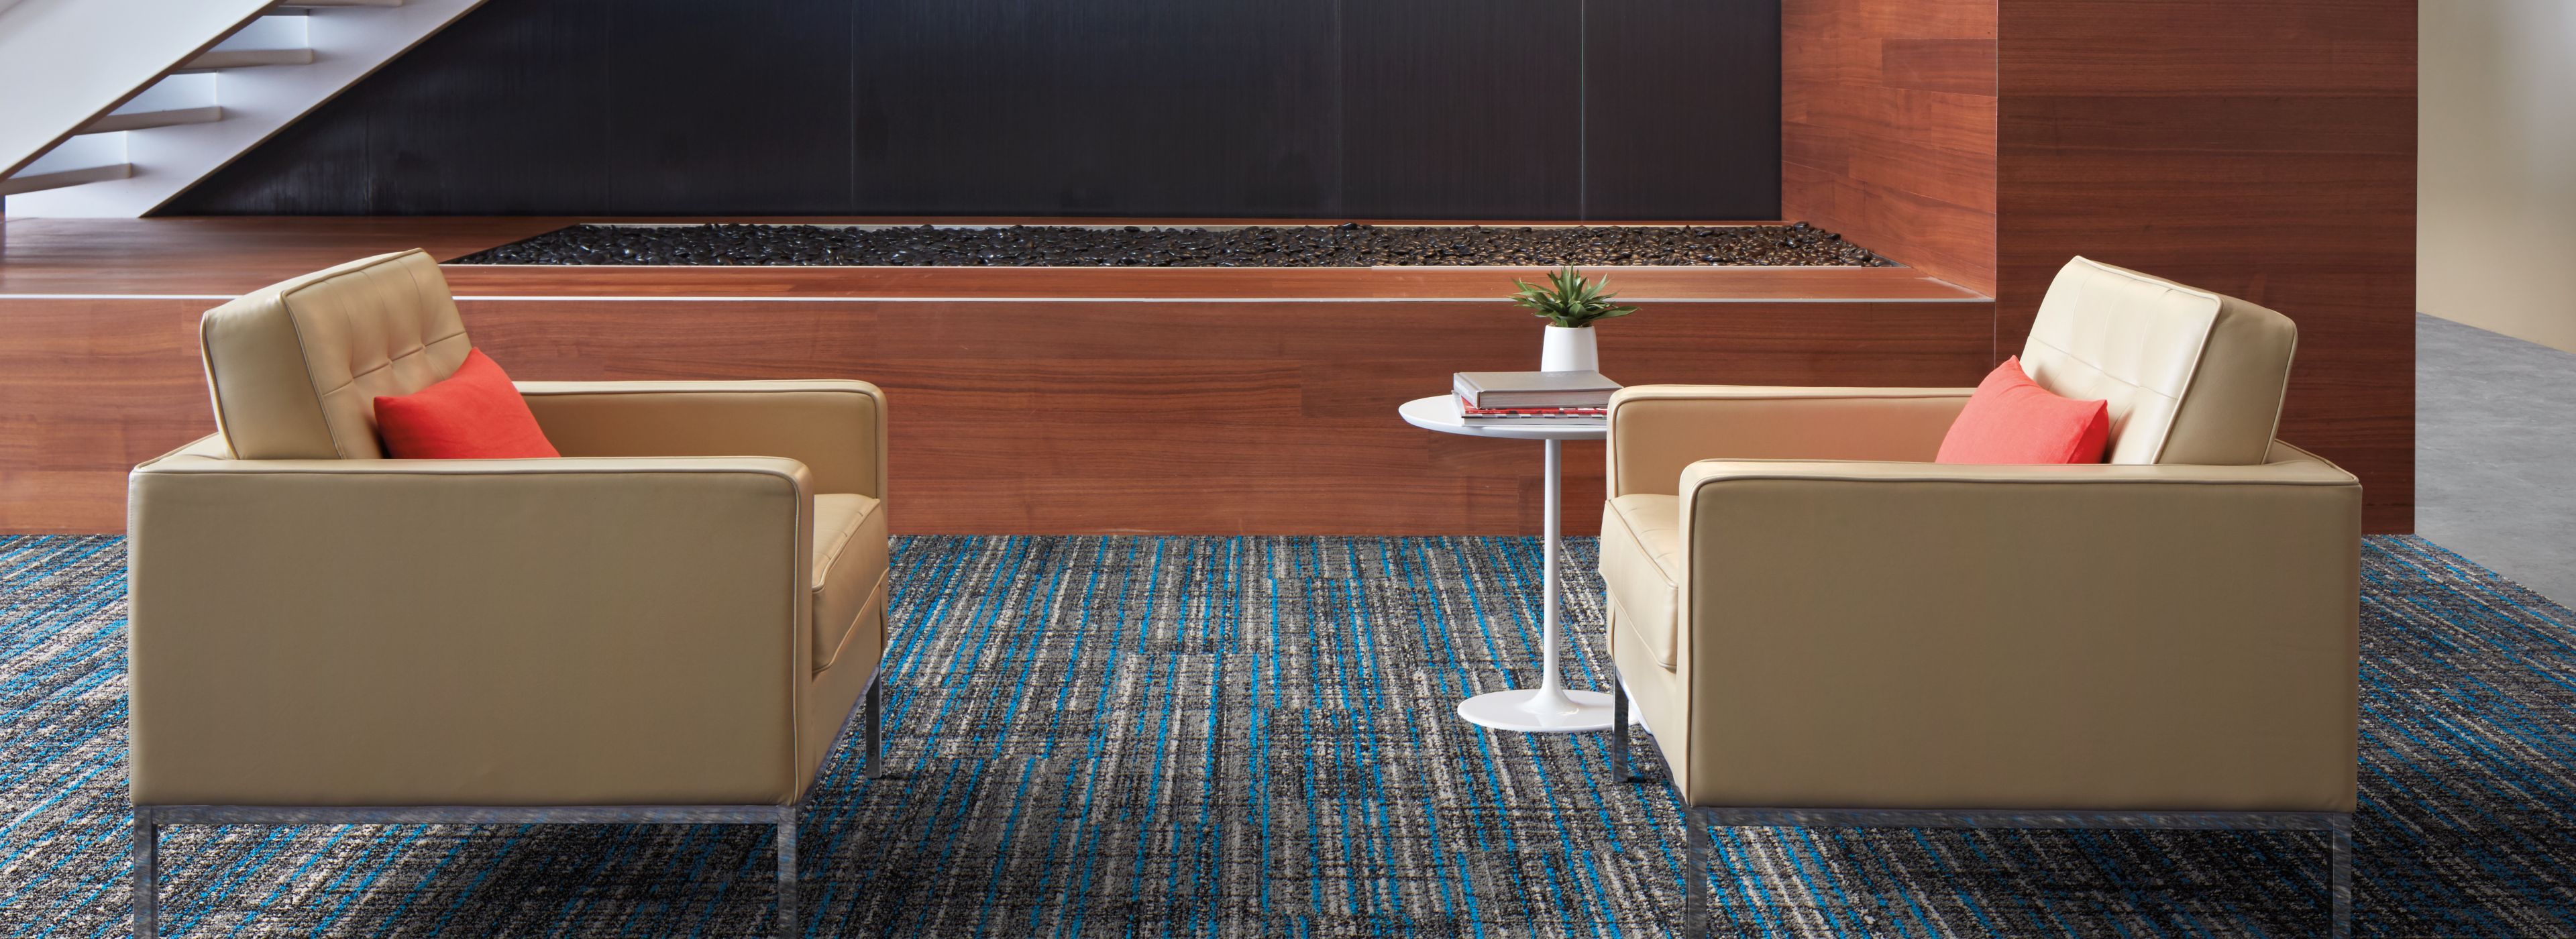 Interface Upload carpet tile and Textured Stones LVT in lobby area with couches numéro d’image 1